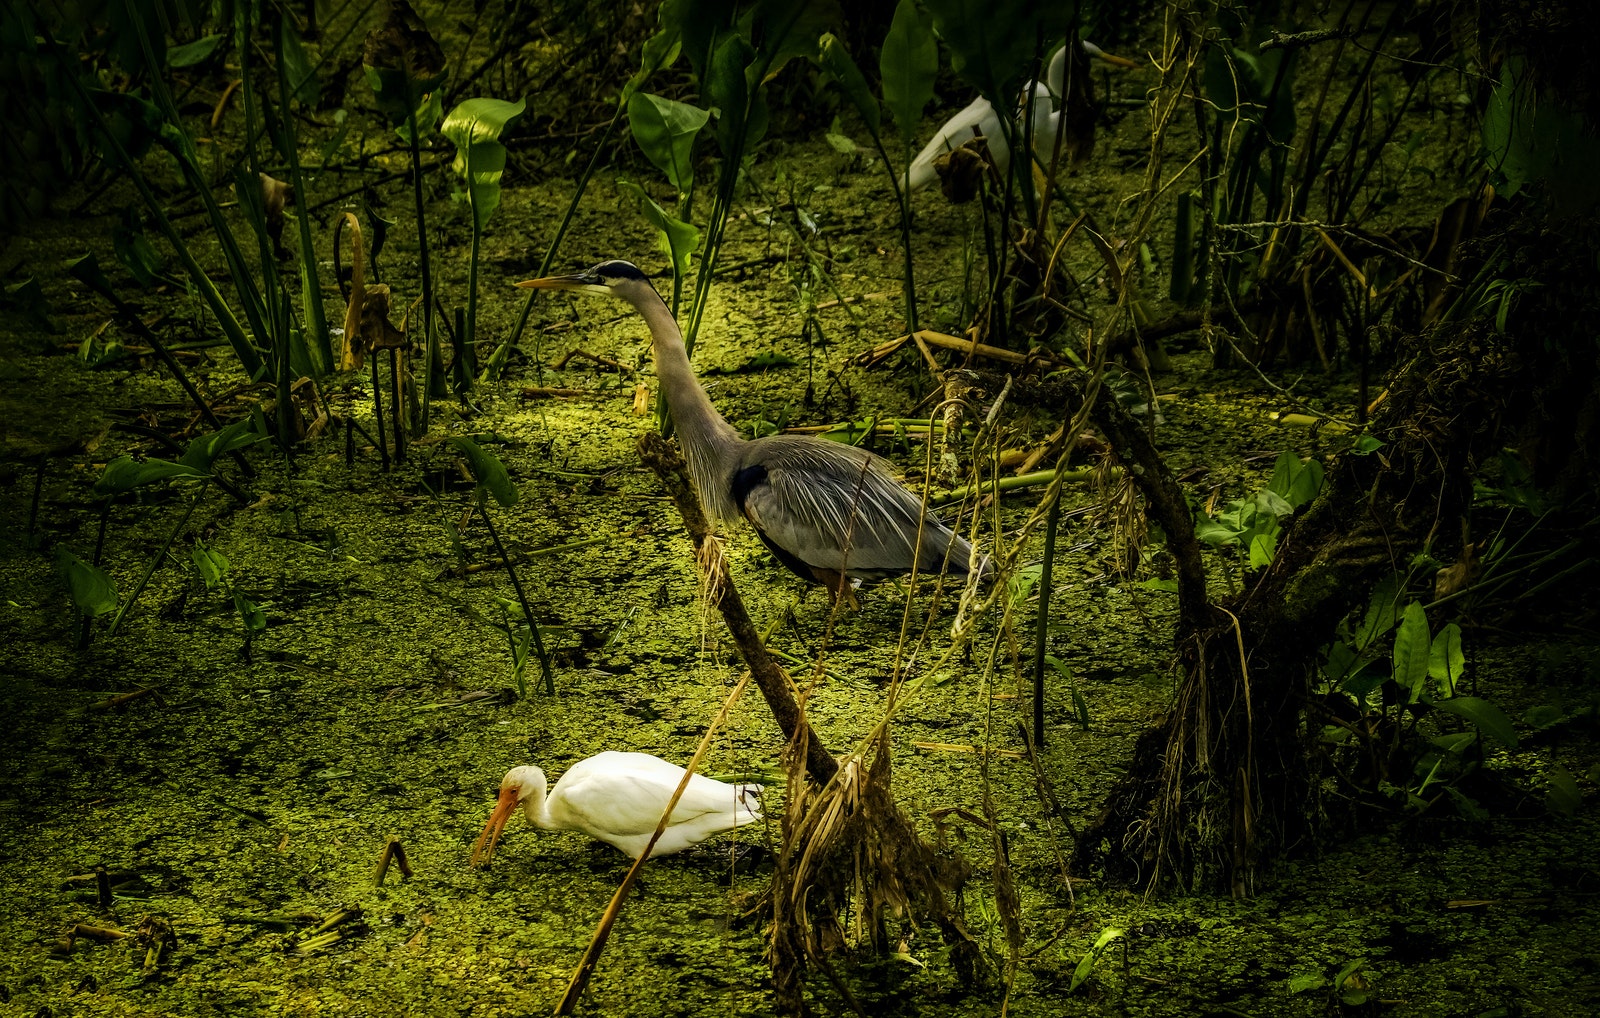 Large Birds in a Swamp